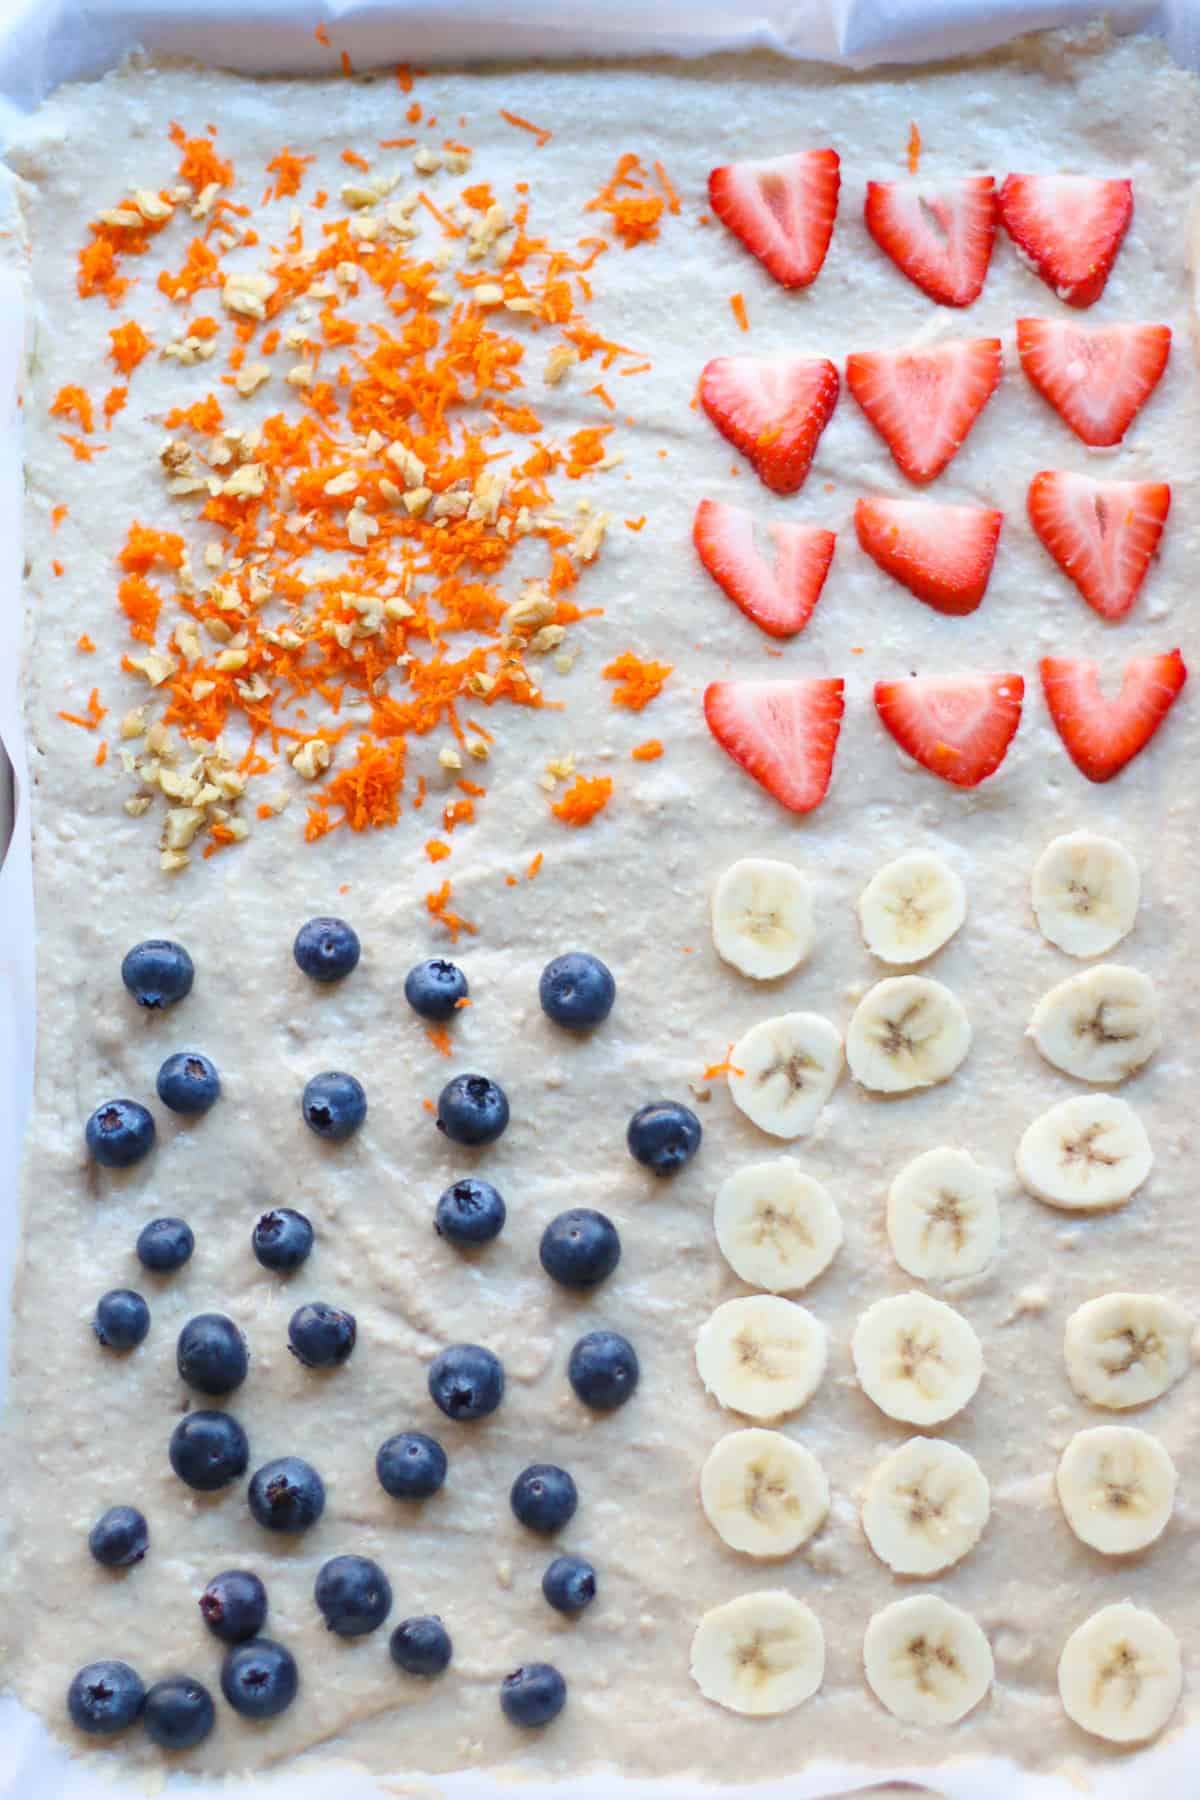 Unbaked sheet pan pancakes in a sheet pan, one-fourth with grated carrots and chopped nuts, one-fourth with sliced strawberries, one-fourth with whole bluerries and one-fourth with sliced bananas.